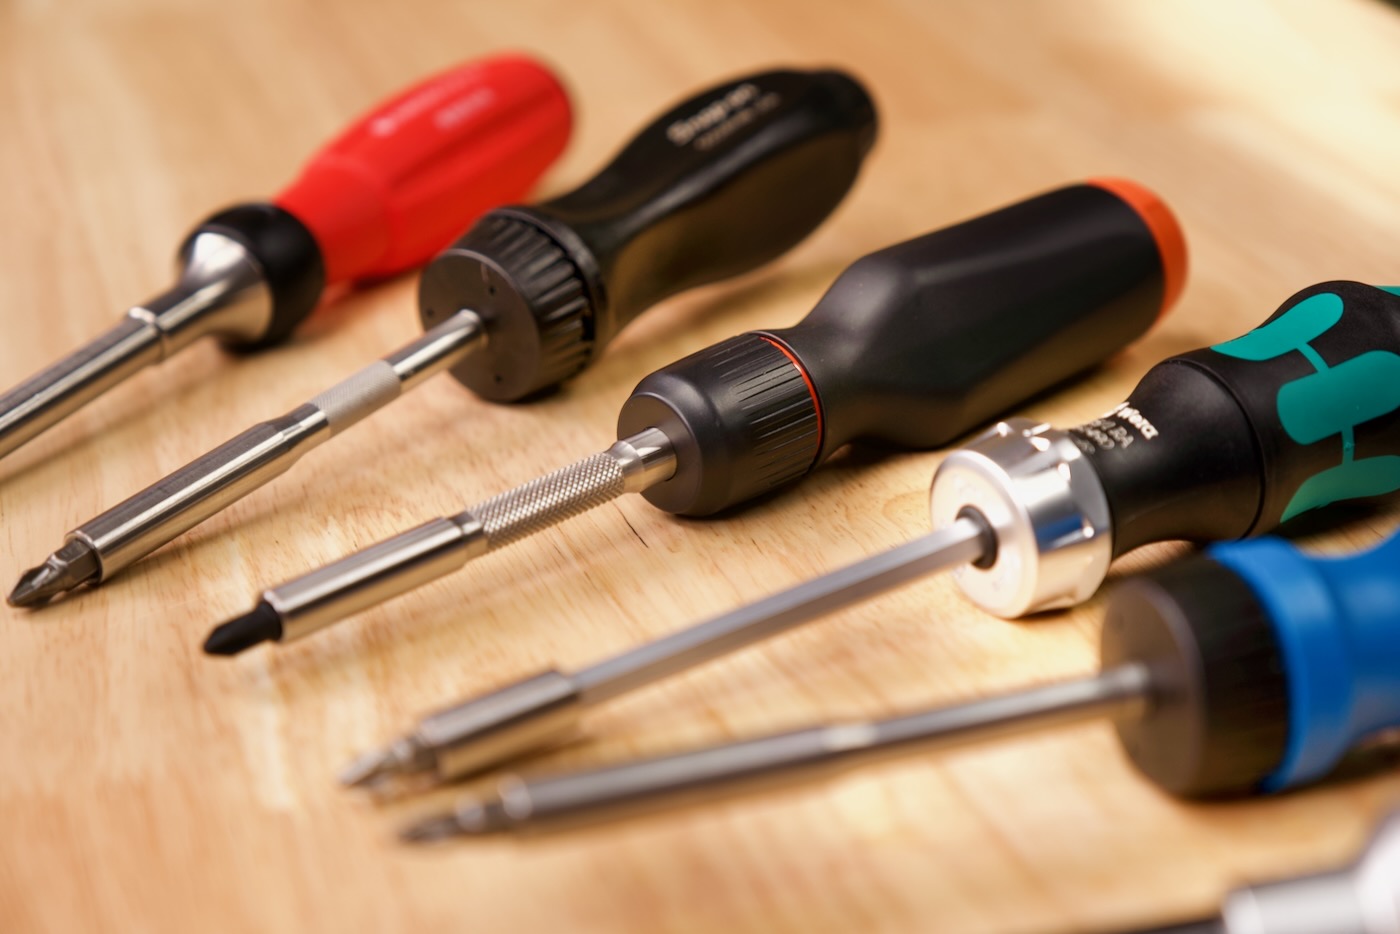 LTT Screwdriver with PB Swiss, Snap-On, Wera, and Williams